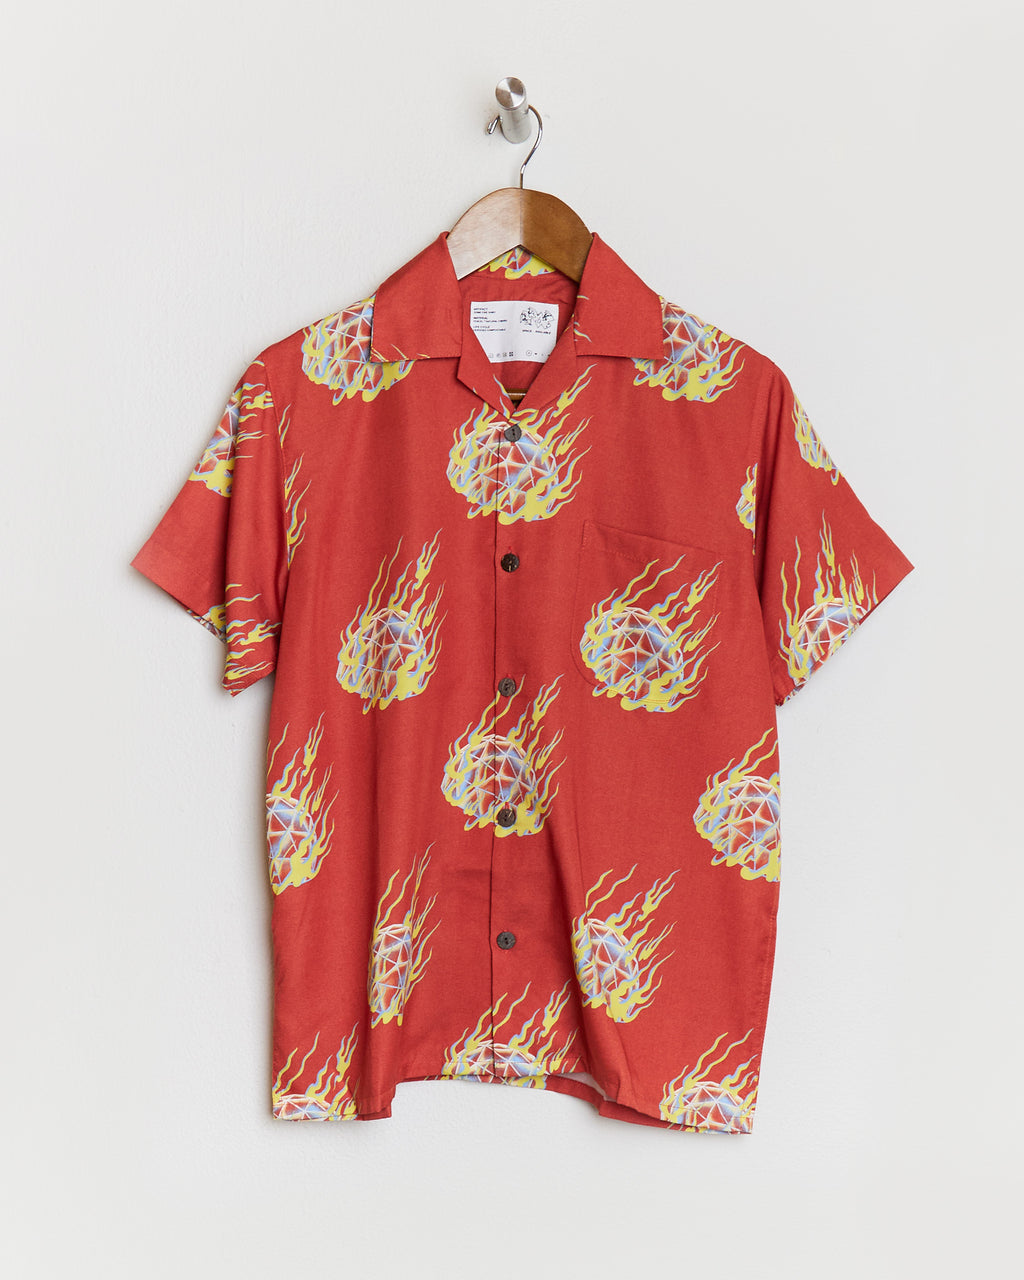 DOME ON FIRE SHIRT